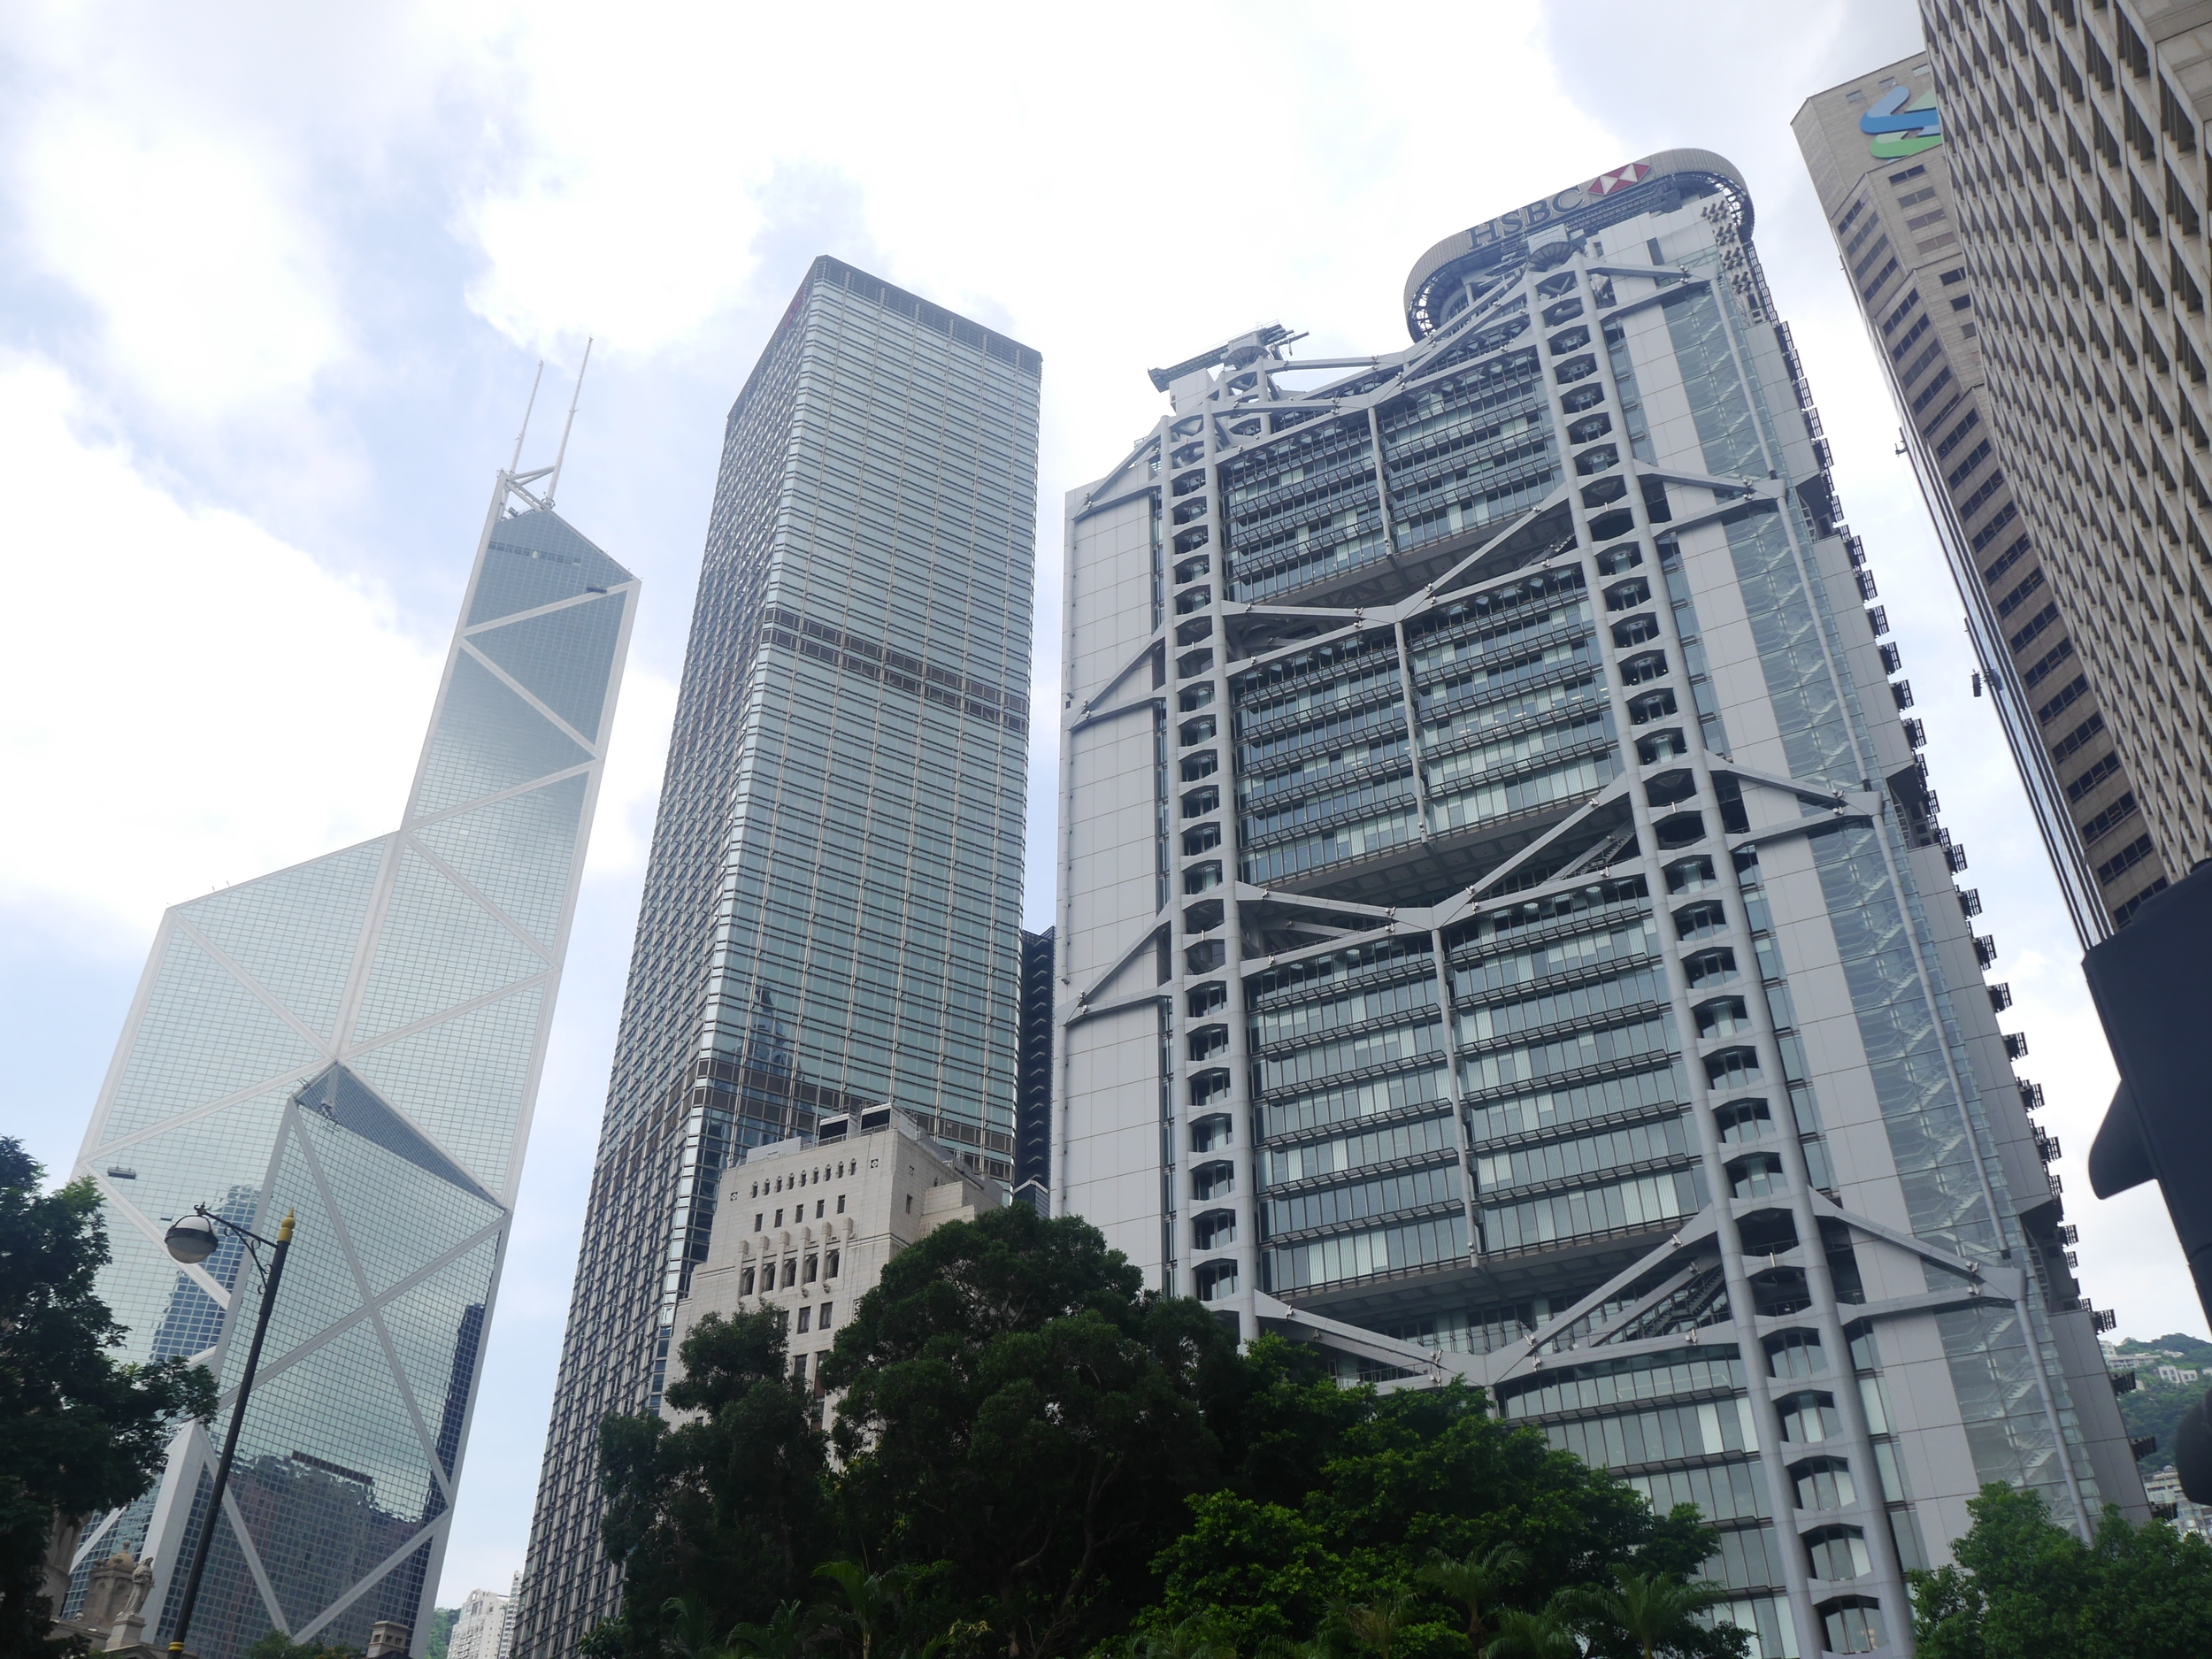  Two of the more famous buildings in Hong Kong. The  Bank of China Tower  on the left and the  HSBC Building  on the right. 